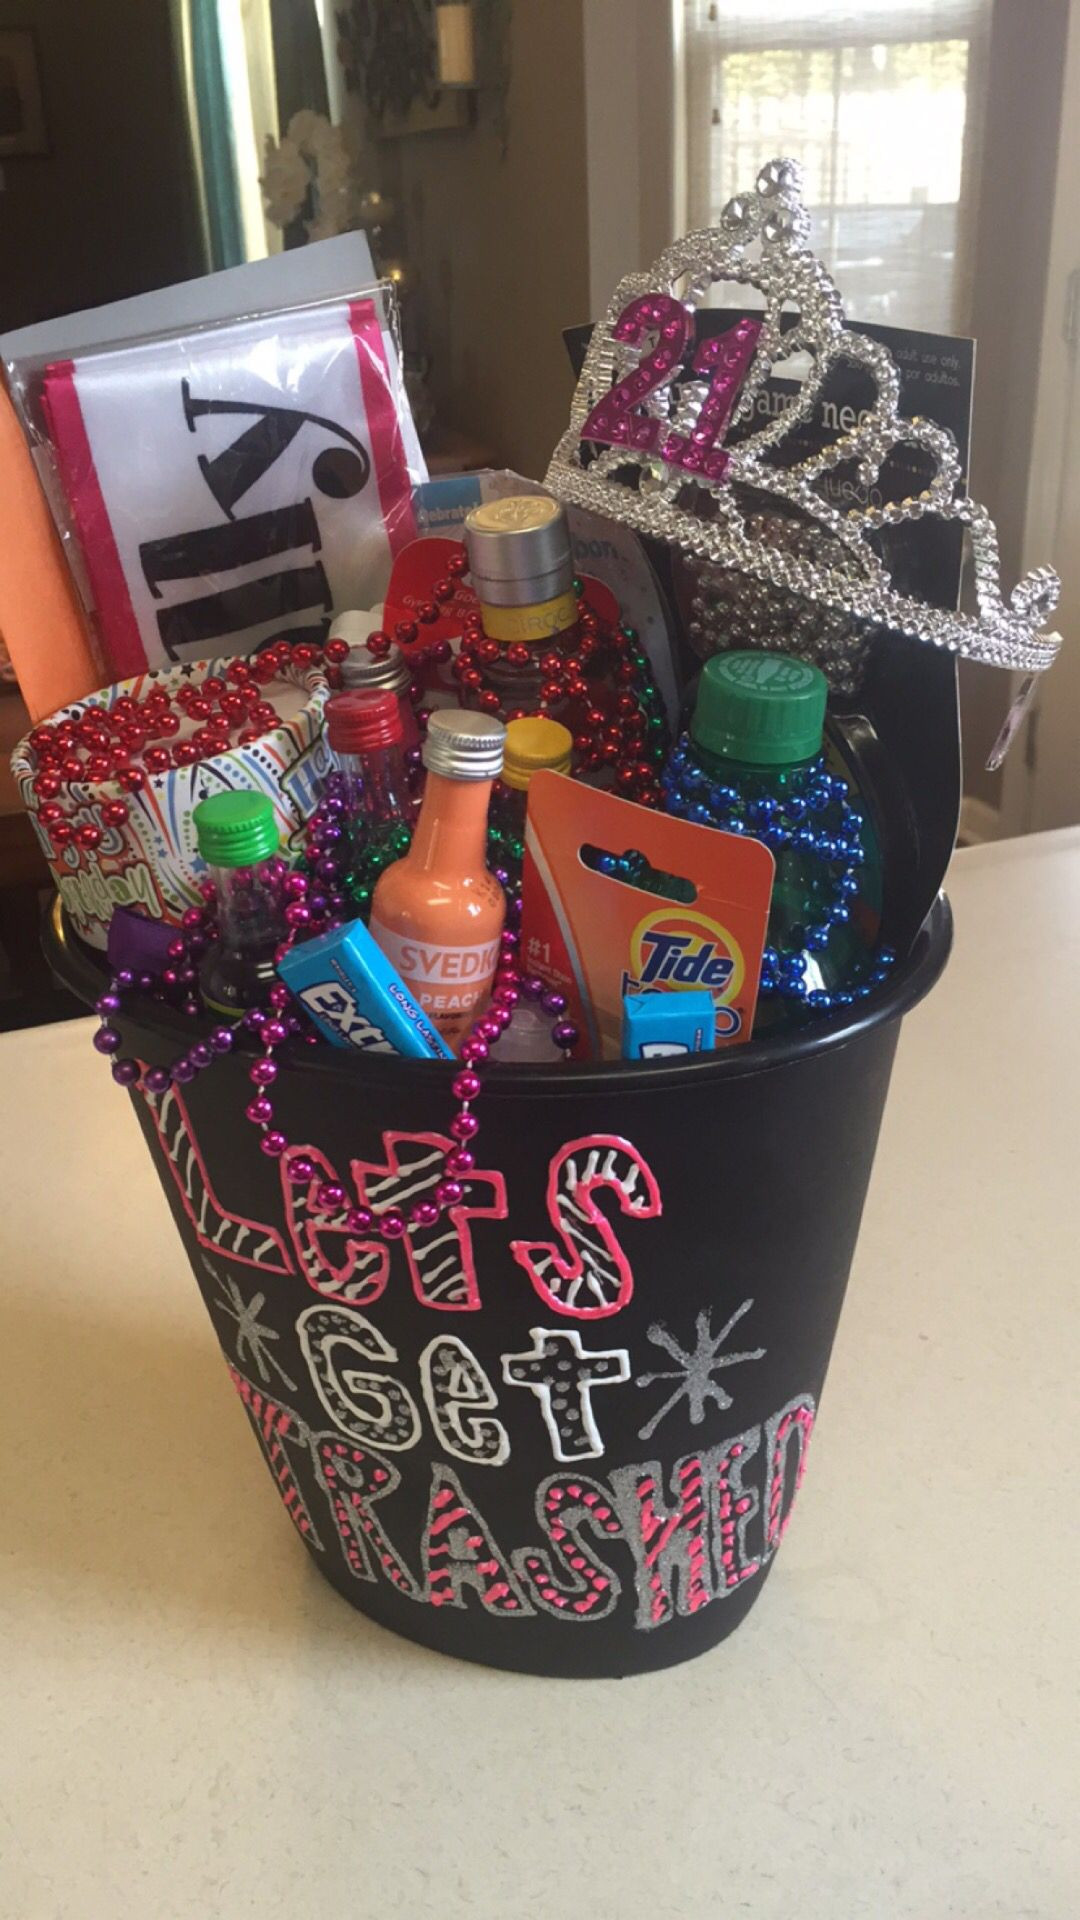 Ideas For Birthday Gifts
 21st birthday t In a trash can saying "let s